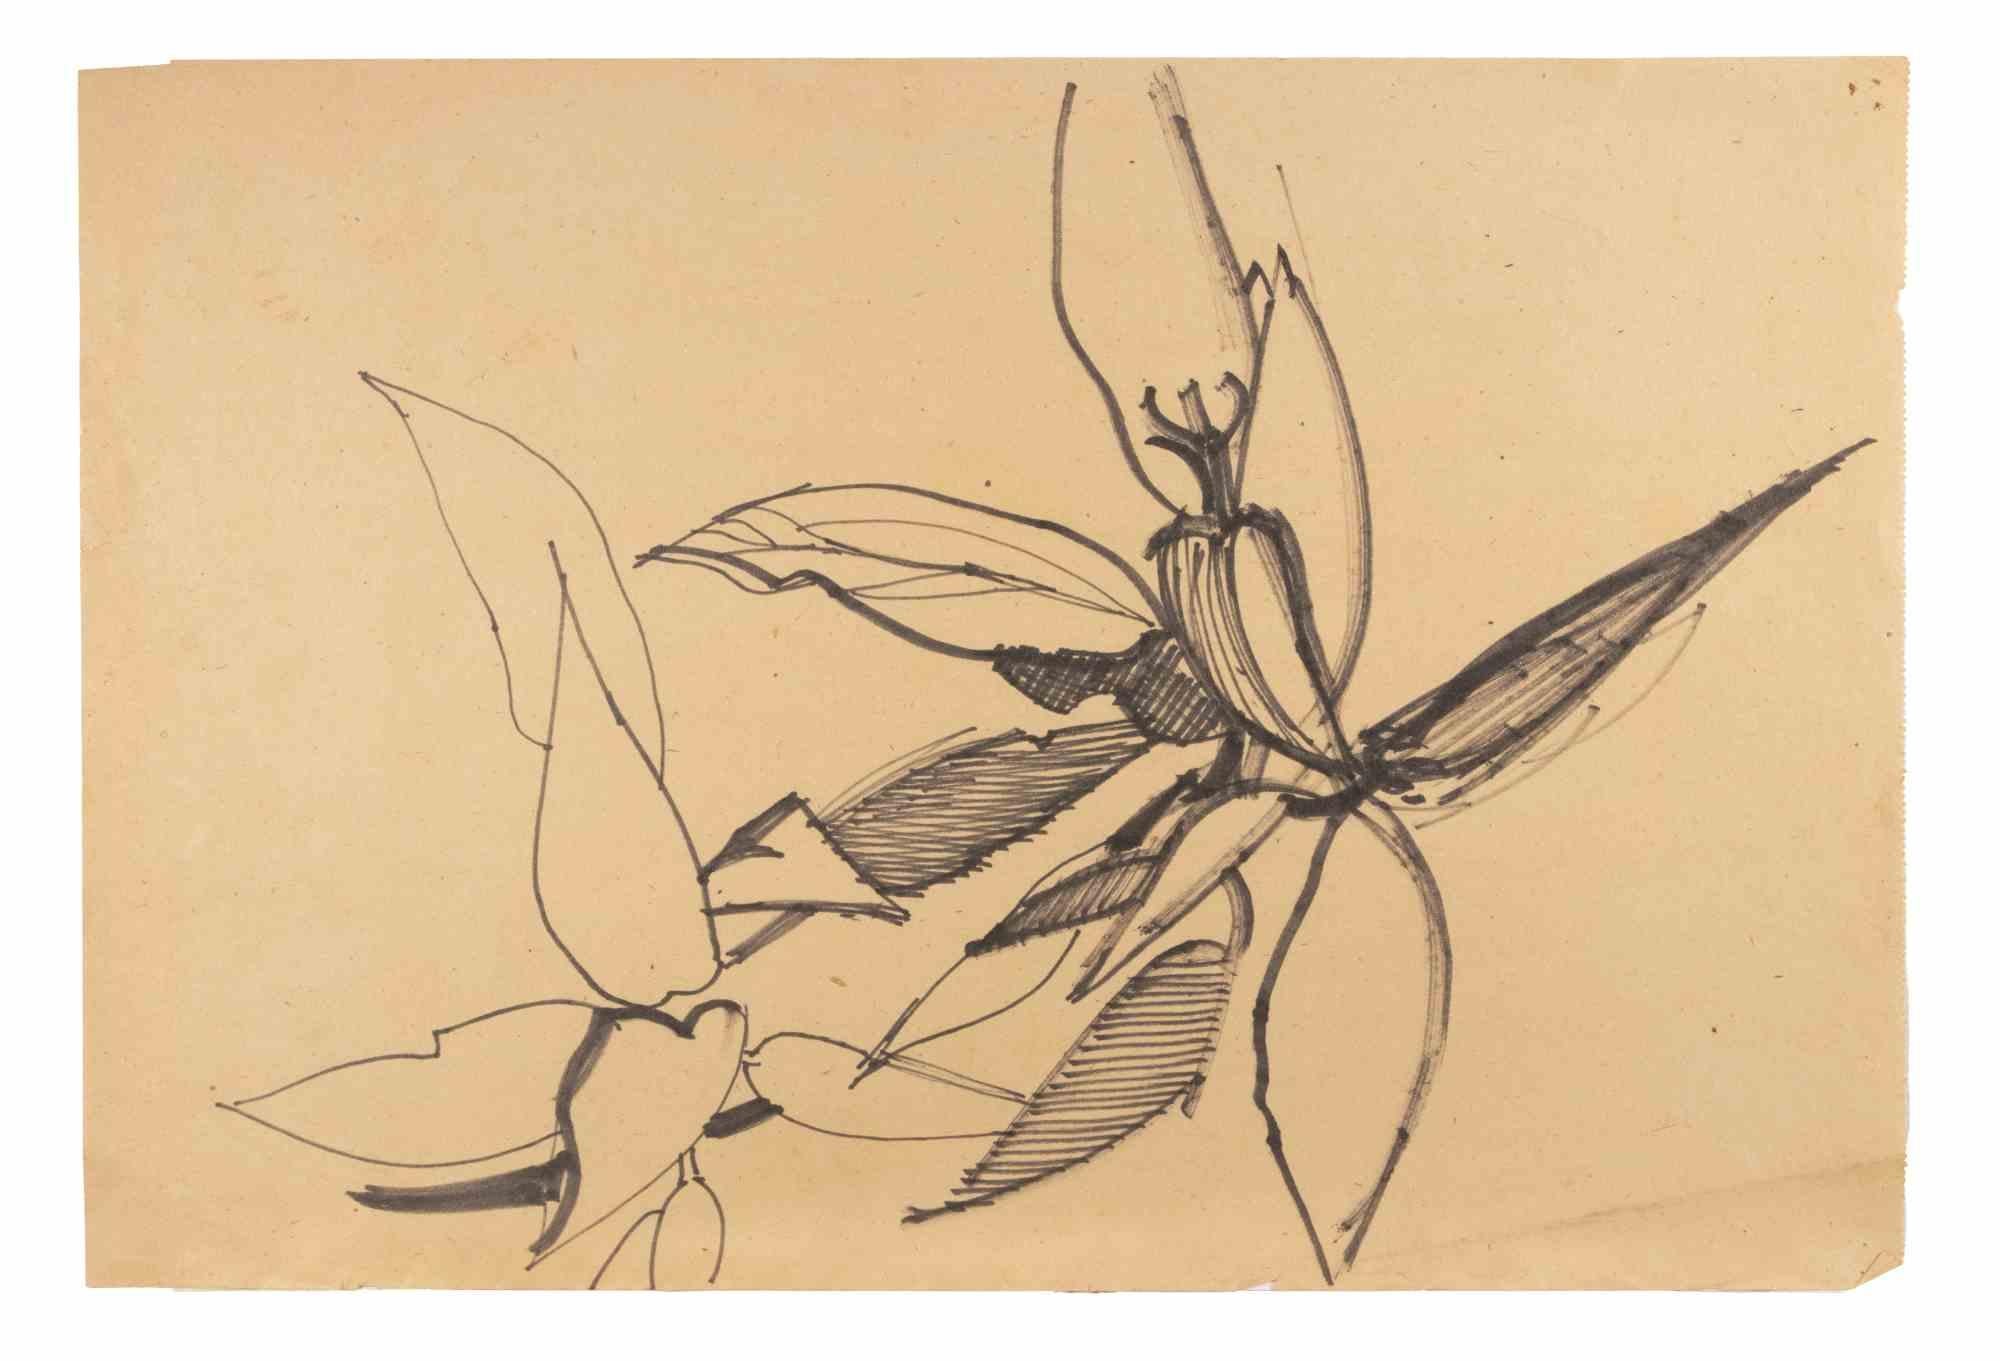 Flowers is a Black Marker Drawing realized by  Reynold Arnould  (Le Havre 1919 - Parigi 1980).

Good condition on a yellowed paper.

No signature.

Reynold Arnould was born in Le Havre, France in 1919. He studied at l'École des Beaux-Arts de Le